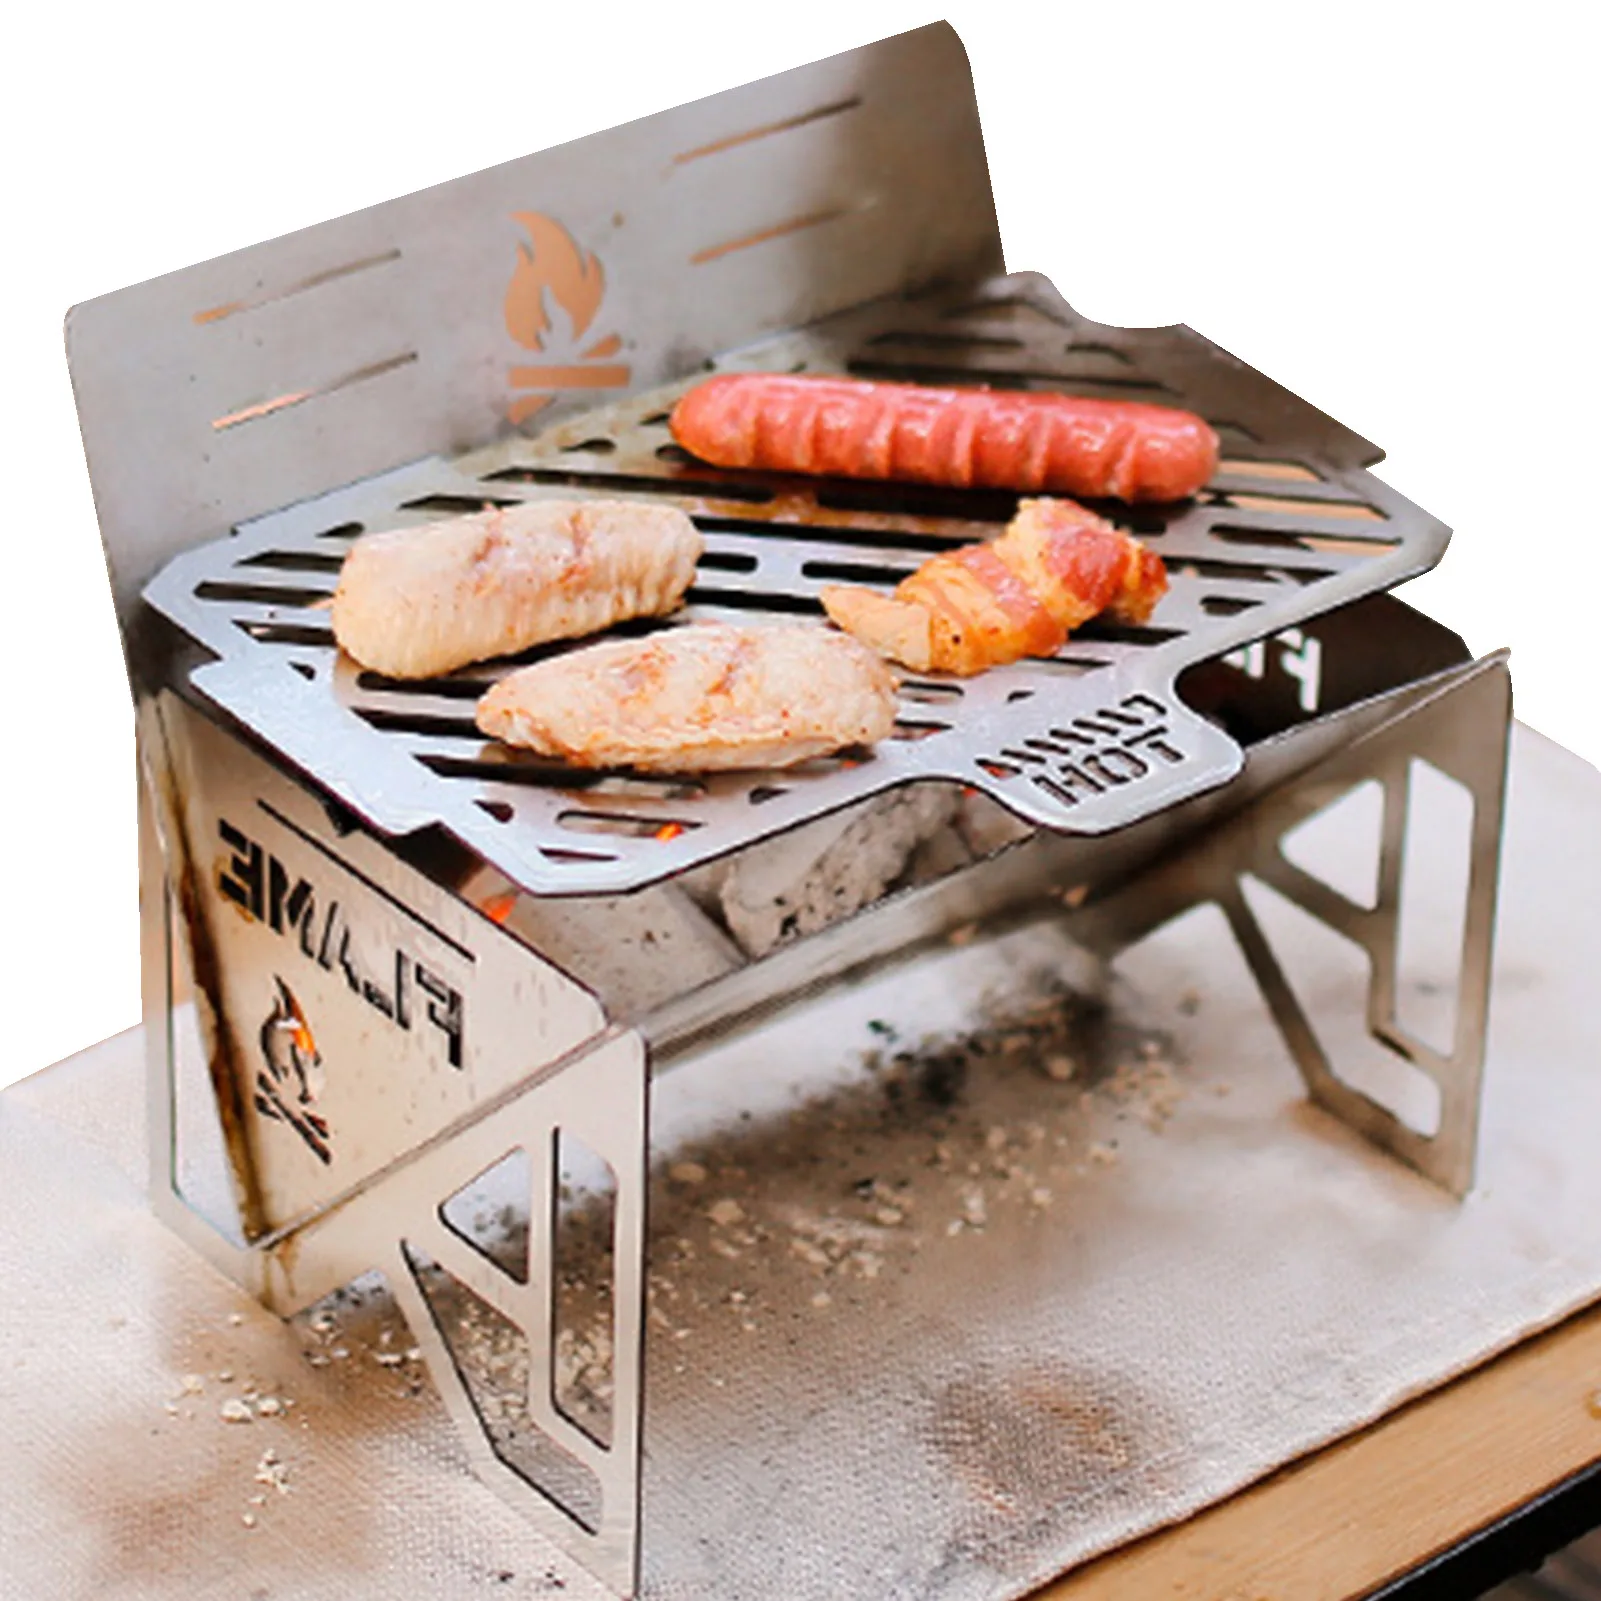 

Wood Grill For Camping Burning Camp Stove Folding Stainless Steel Grill Barbecue Desk Tabletop Outdoor Stainless Steel Smoker